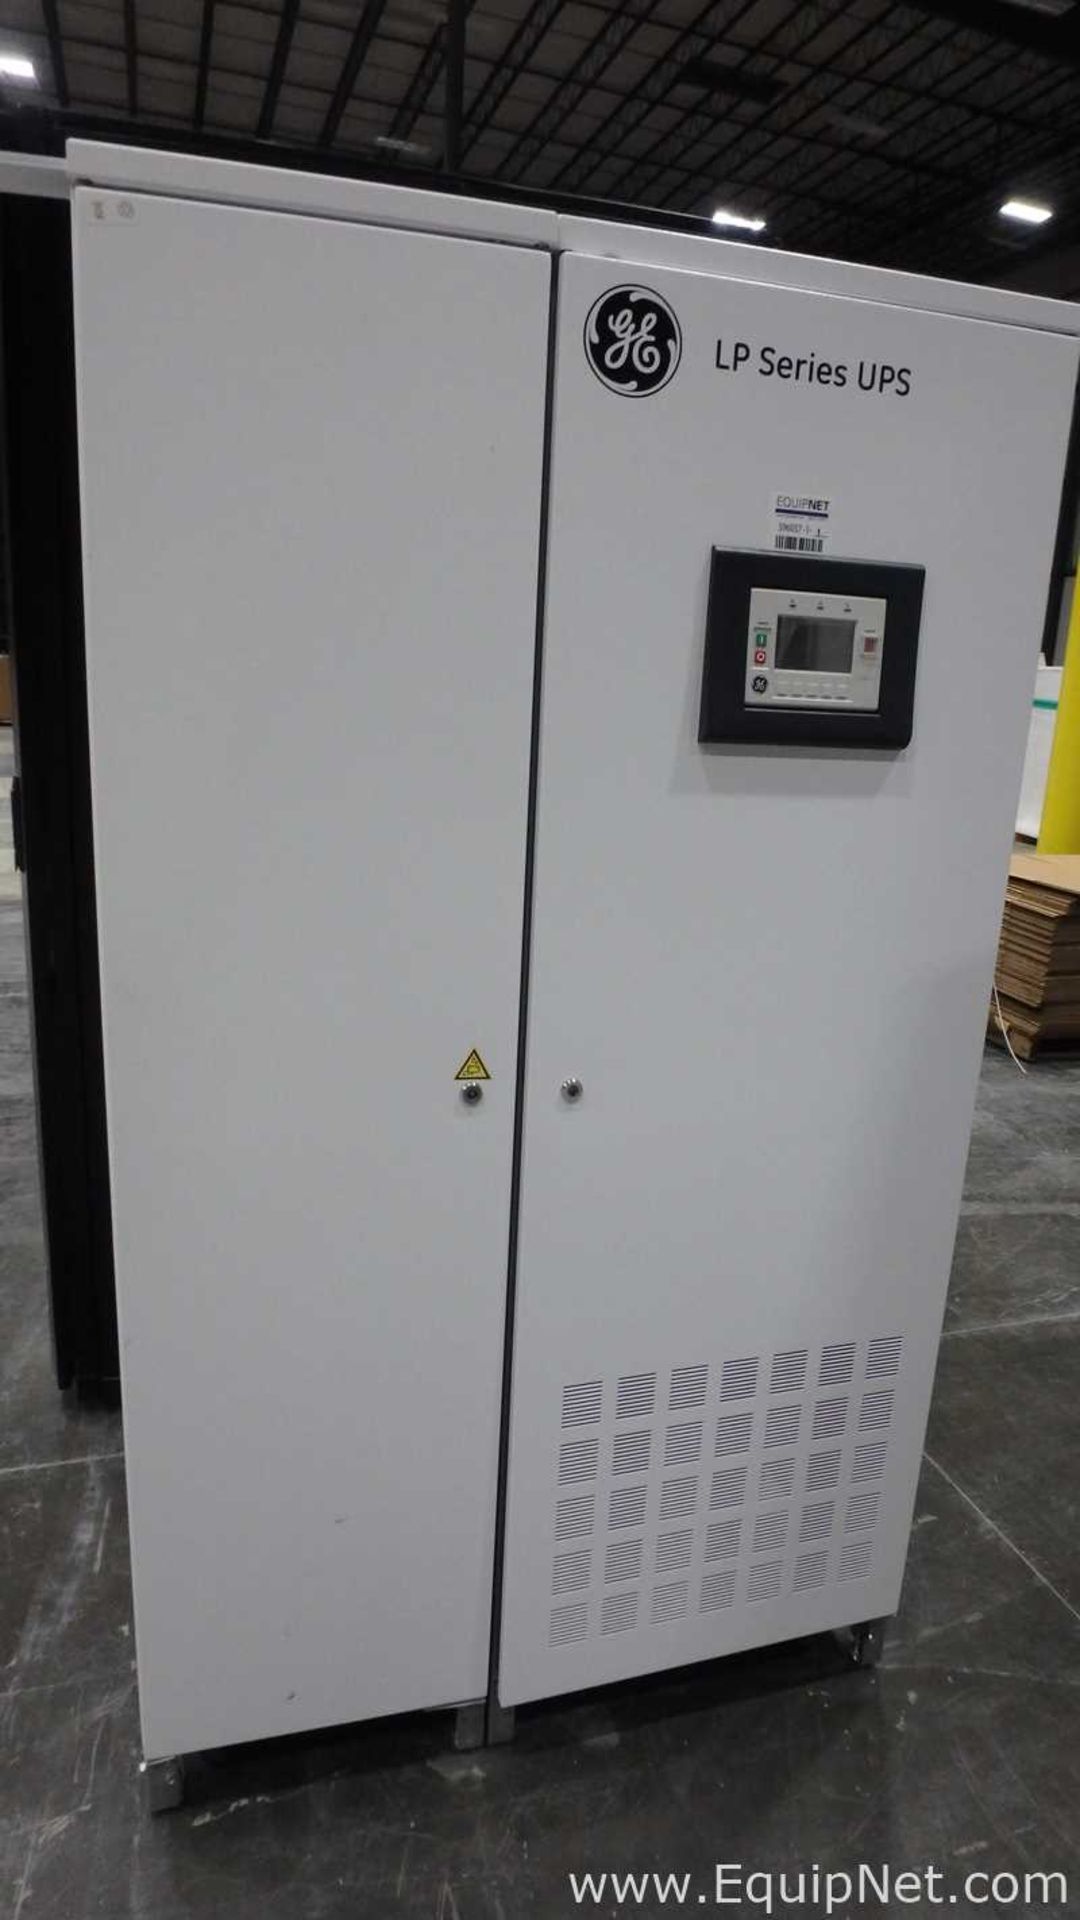 GE Comsumer and Industrial SA LP Series UPS Uninterruptible Power Supply With Bypass Panel